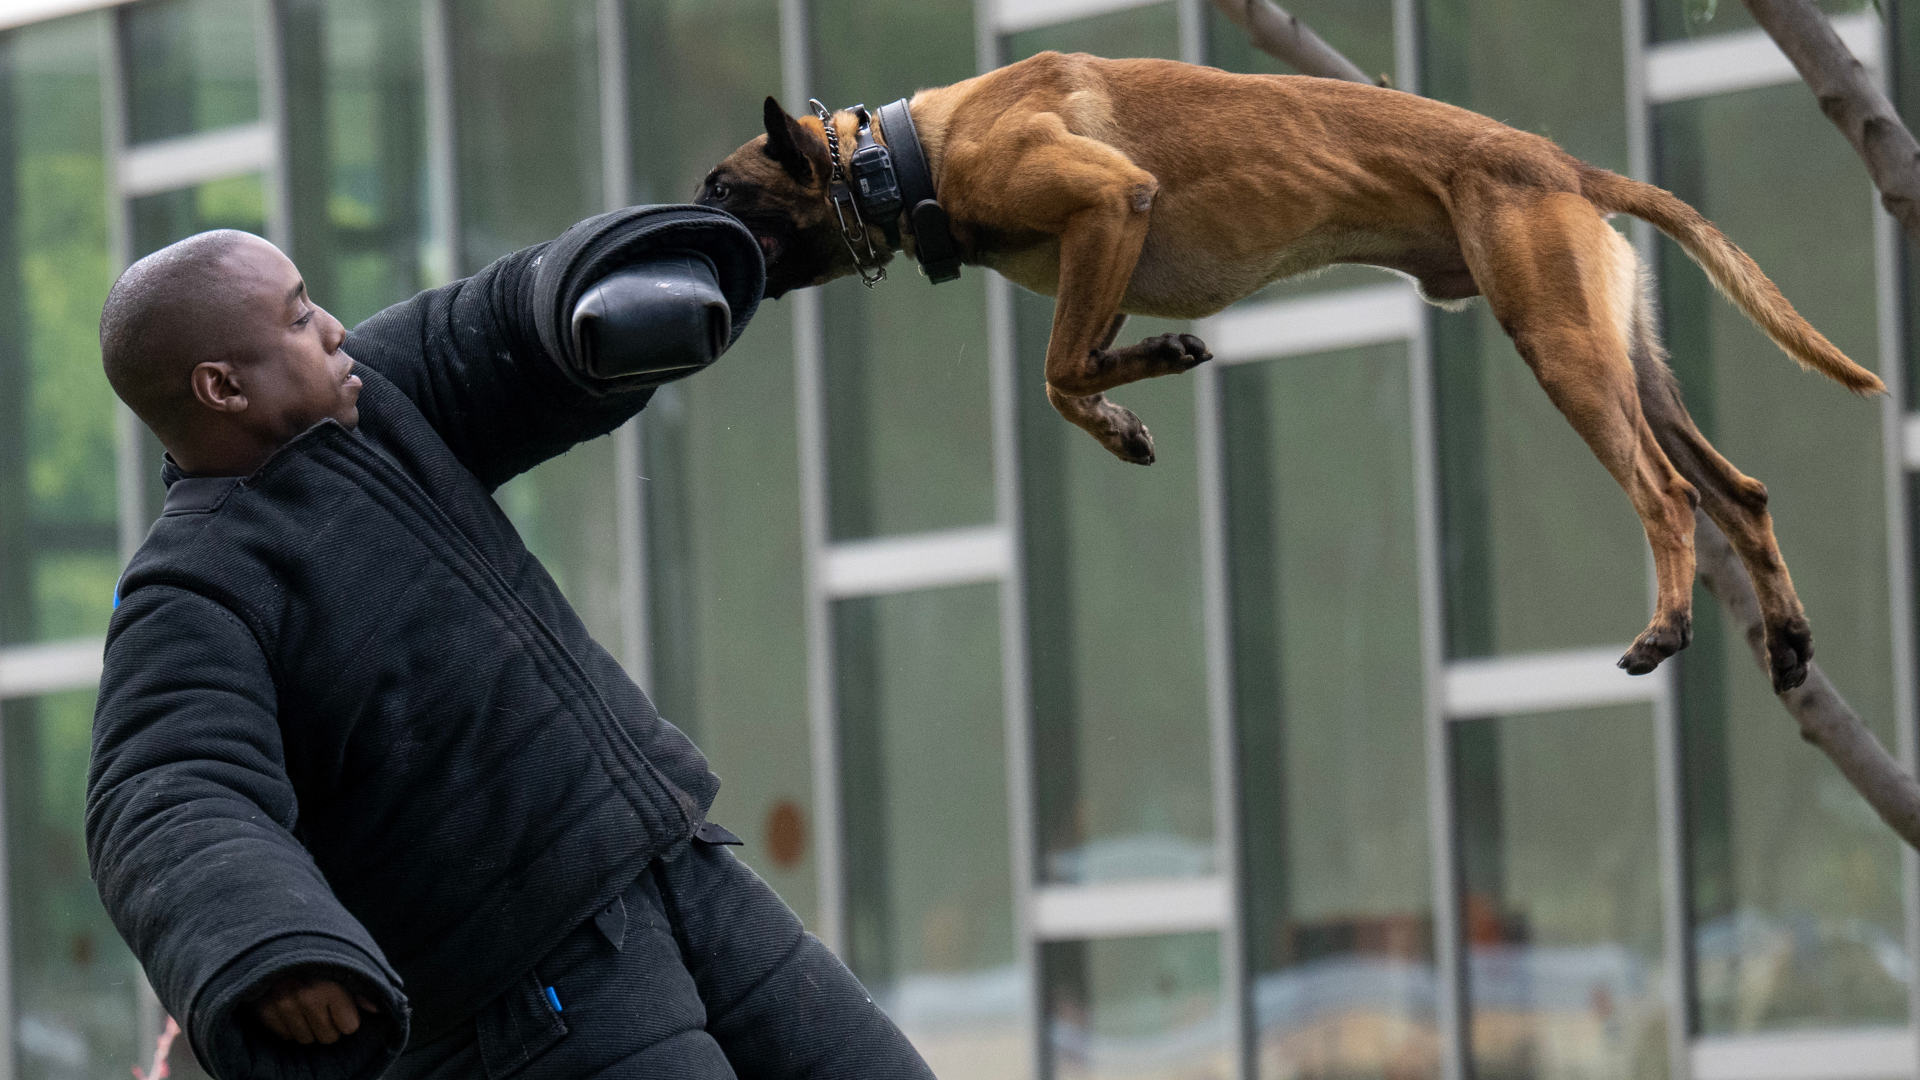 In Los Angeles this May, a LAPD K-9 handler wears a protective bite suit during a demonstration with a police dog named Bentley.